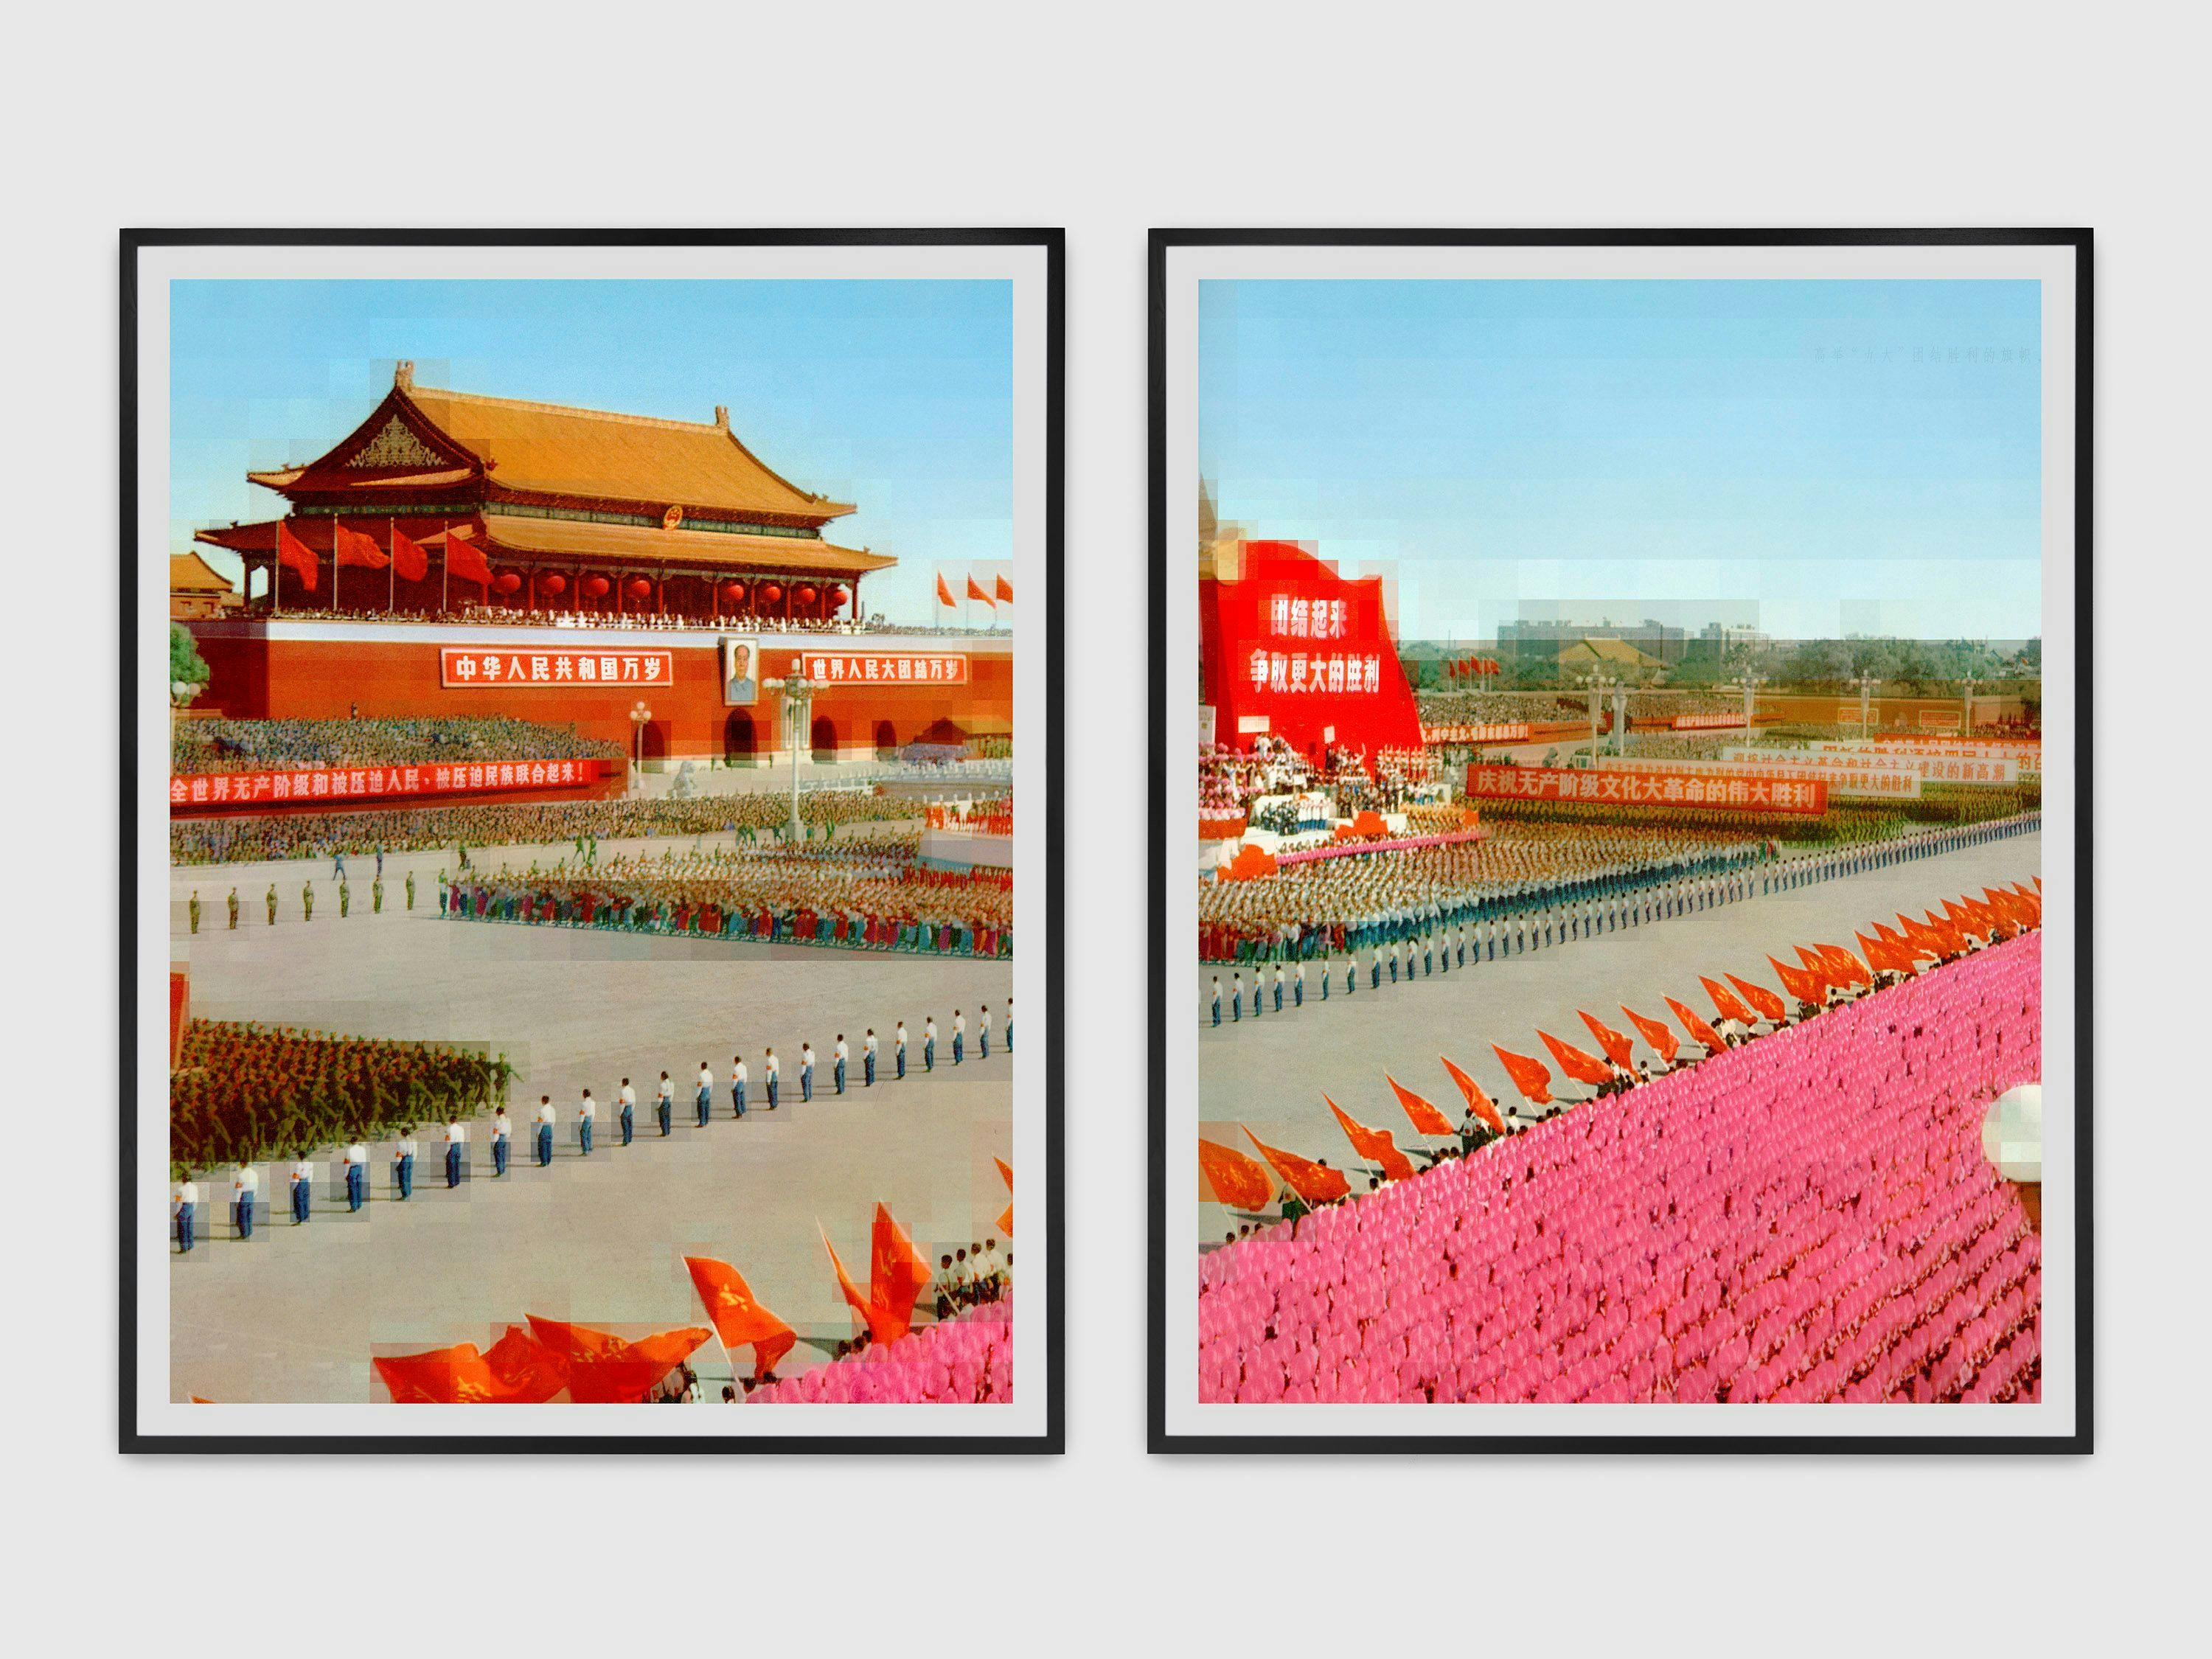 A diptych by Thomas Ruff titled tableau chinois_19a, tableau chinois_19b, dated 2020.